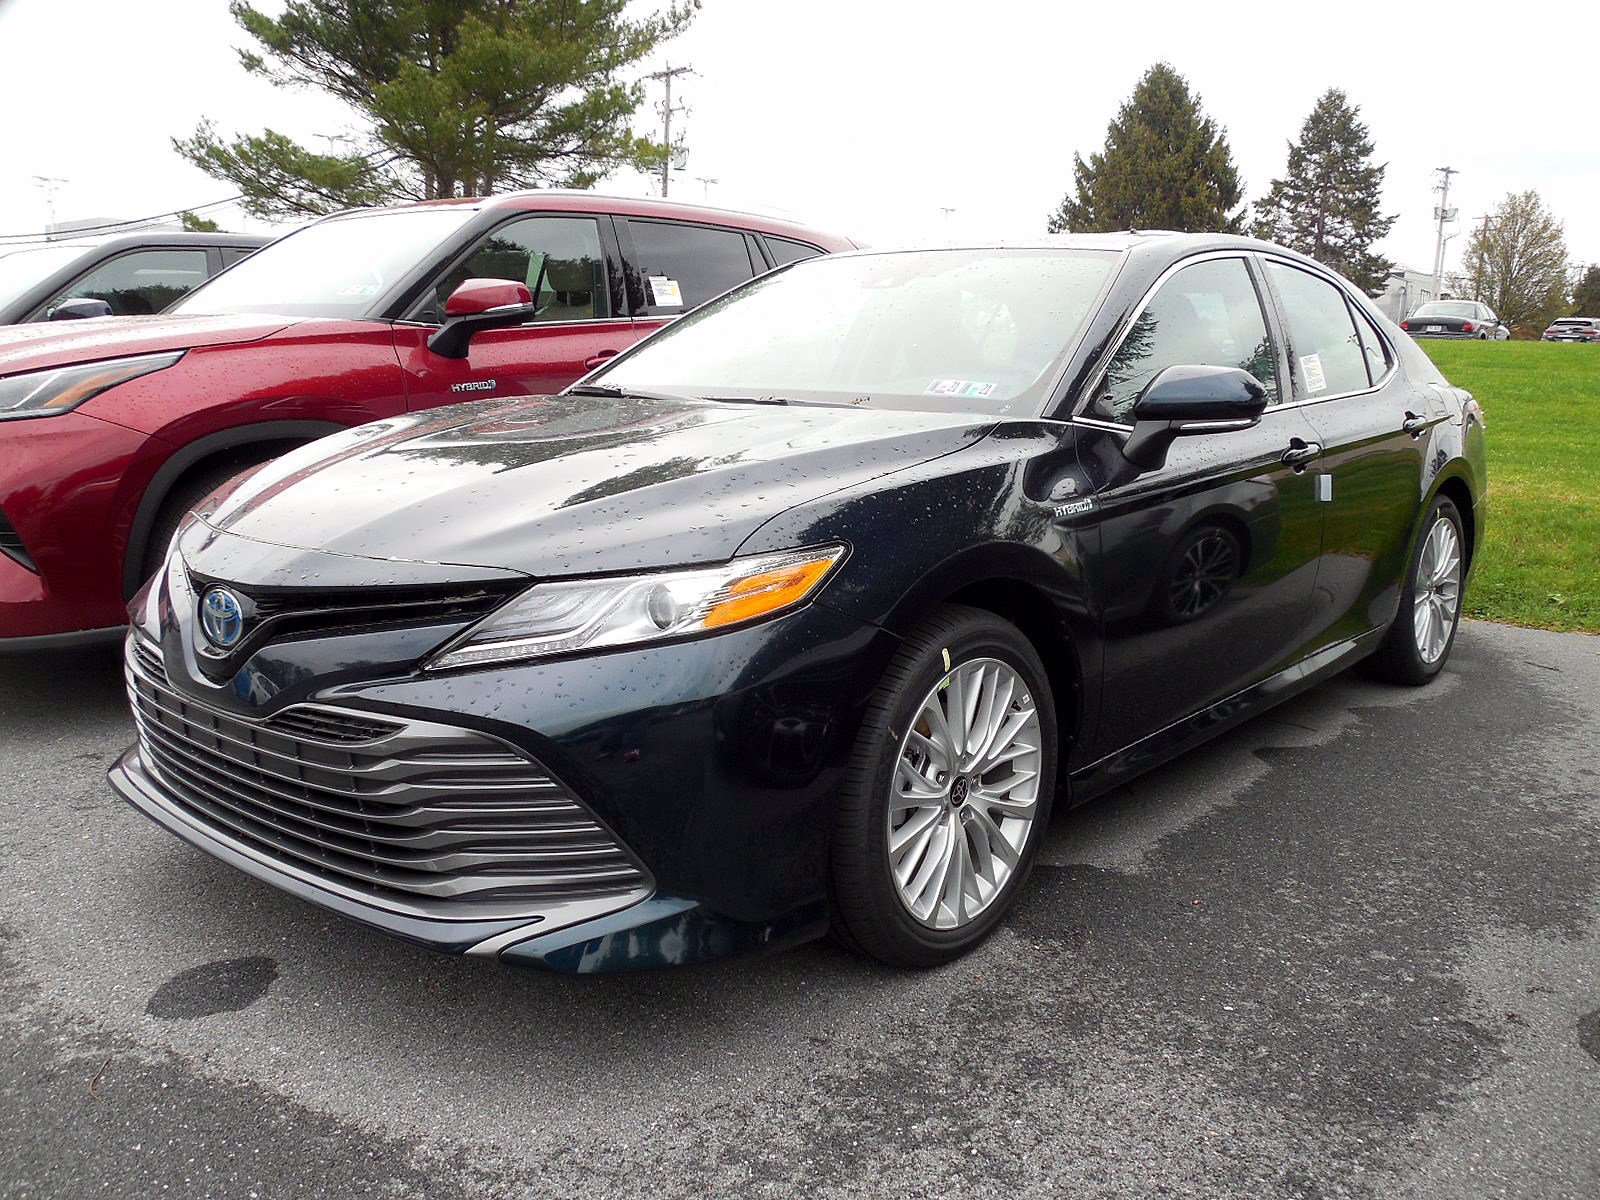 New 2020 Toyota Camry Hybrid XLE 4dr Car in East Petersburg #14904 ...
